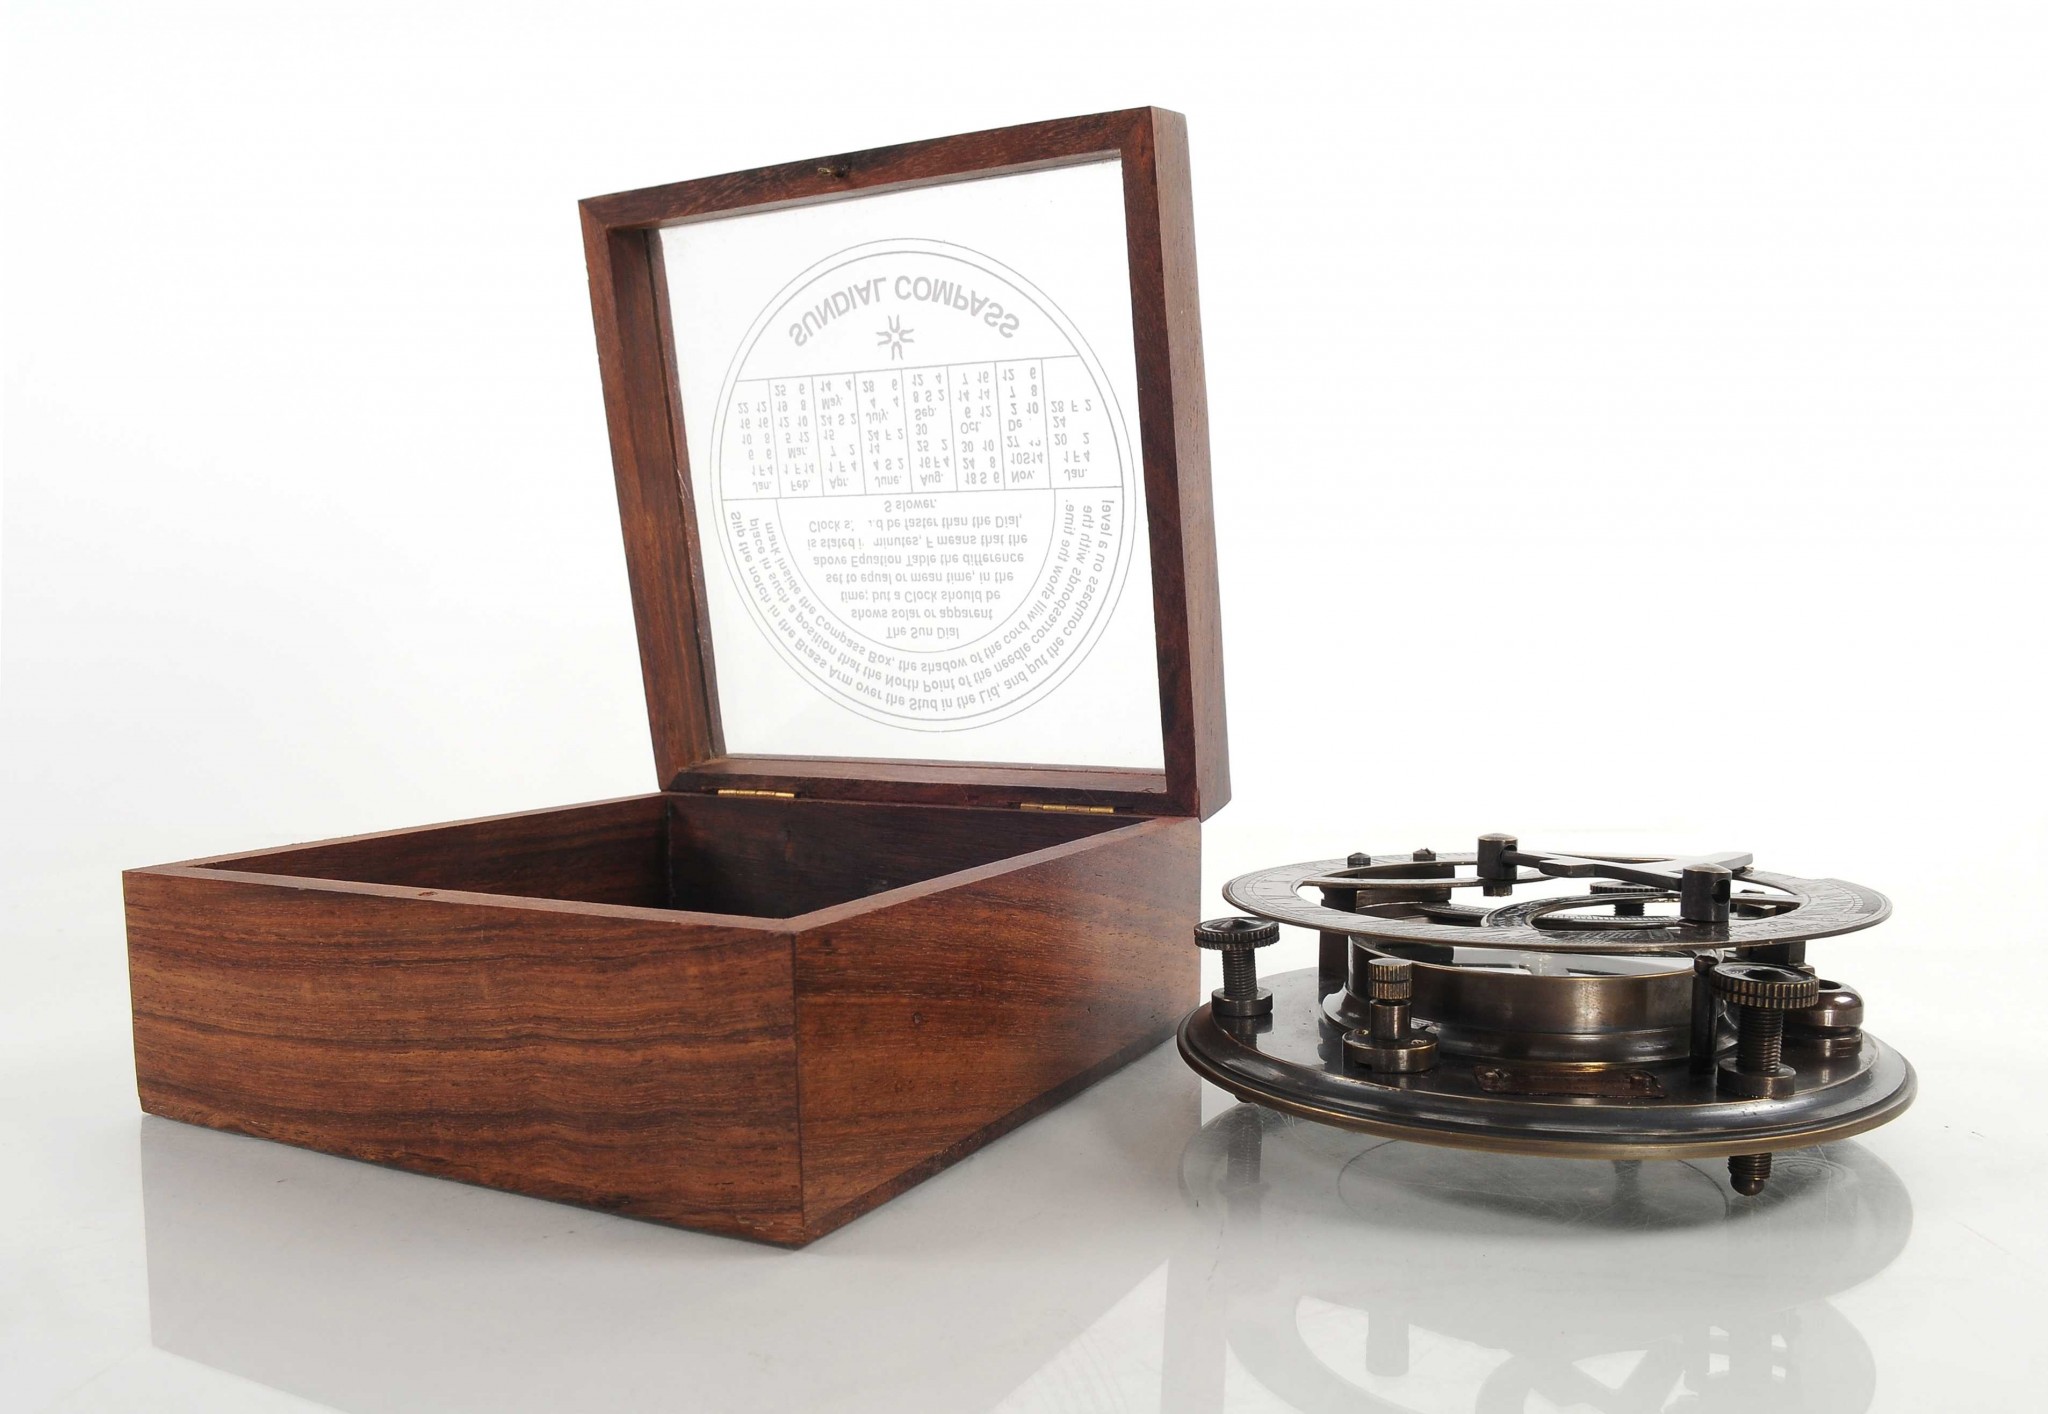 5" x 5" x 4" Sundial Compass in Wood Box - Large